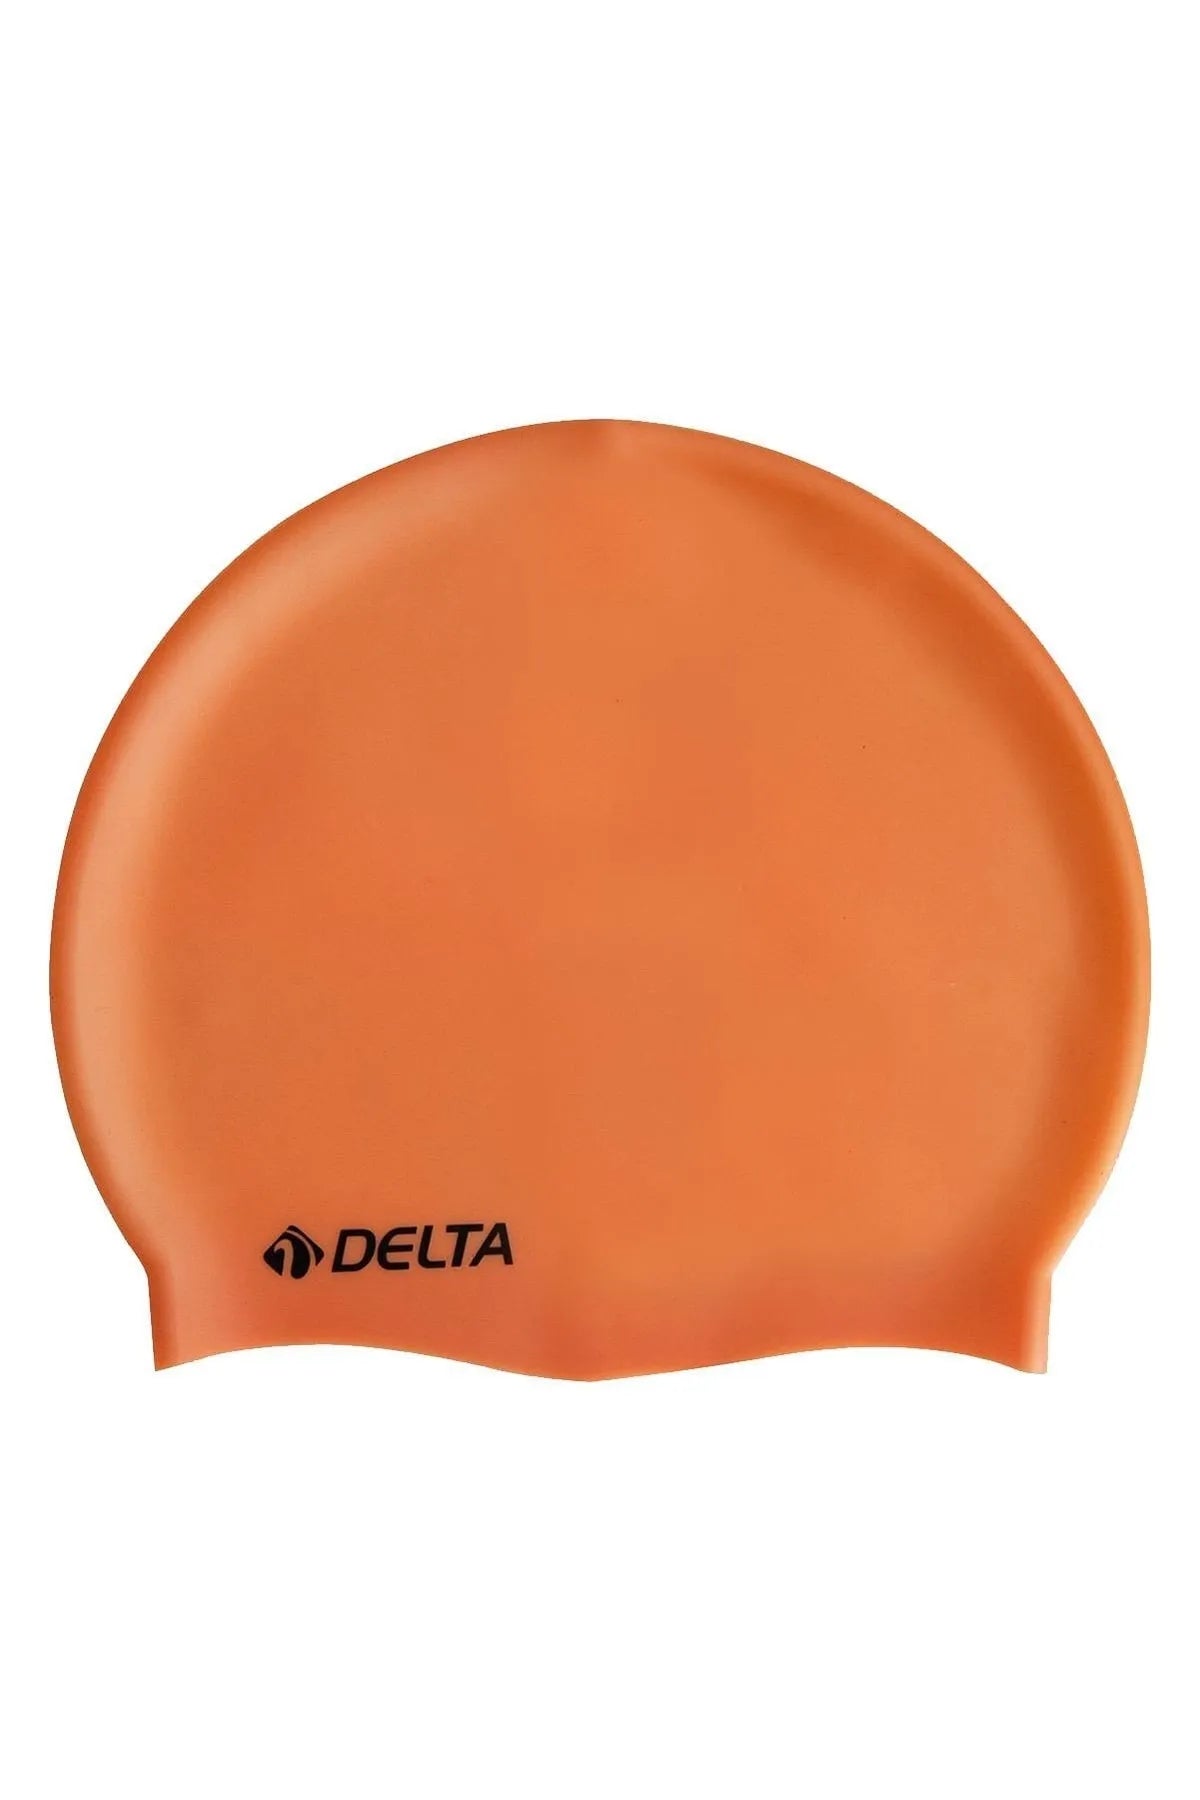 Silicone Bone Deluxe Swim Cap - Solid Red for Pool and Sea | Ideal for Braids, Dreadlocks, and Long Hair | Includes Free Ear Plugs and PVC Storage Bag